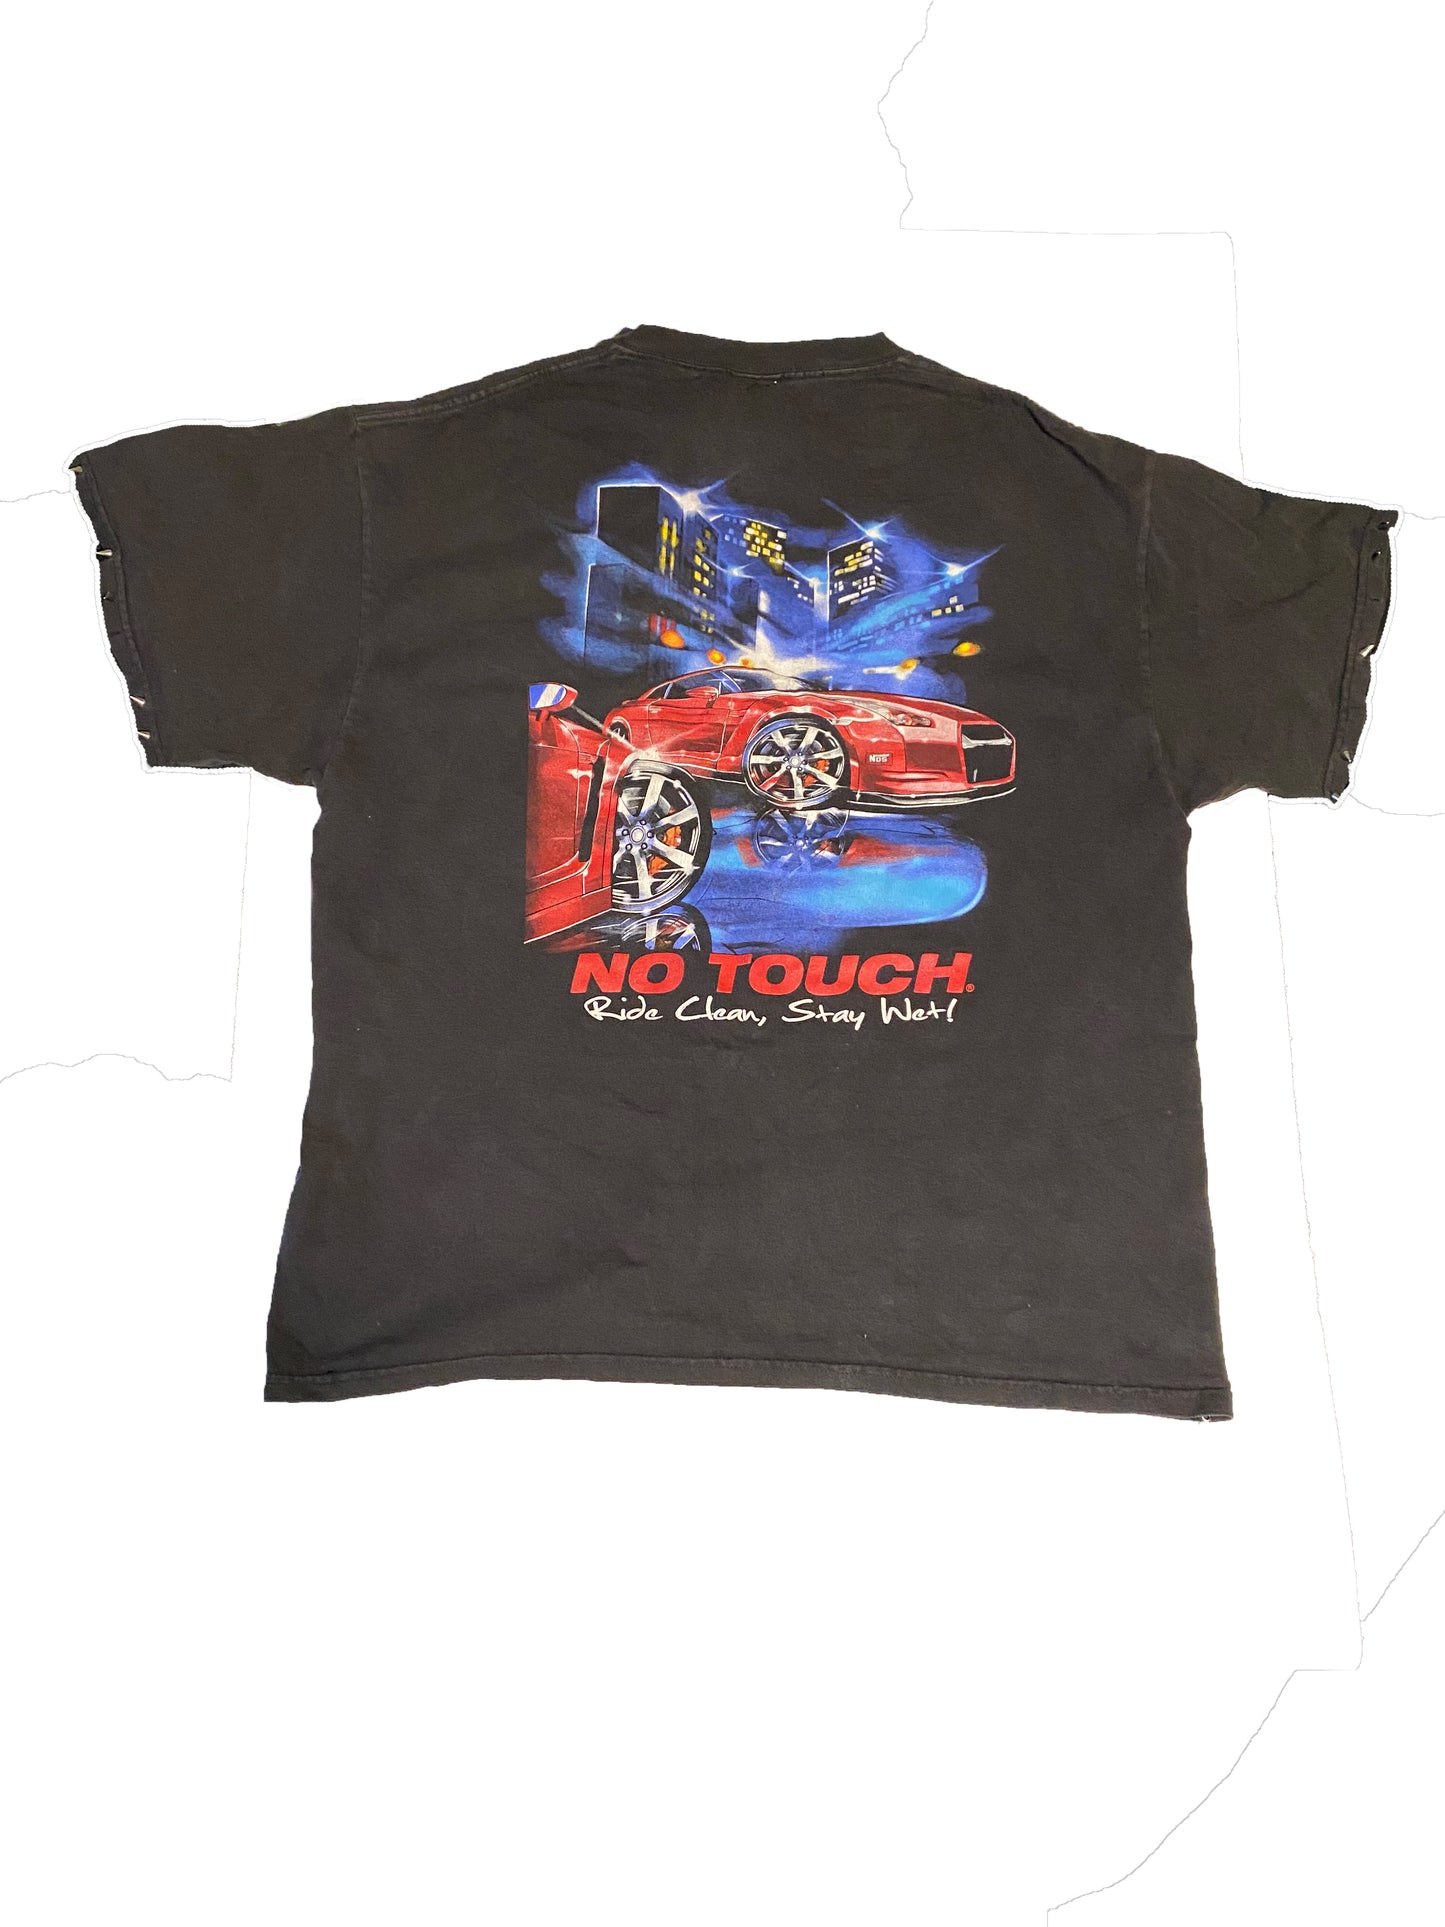 "NO TOUCH" Tee